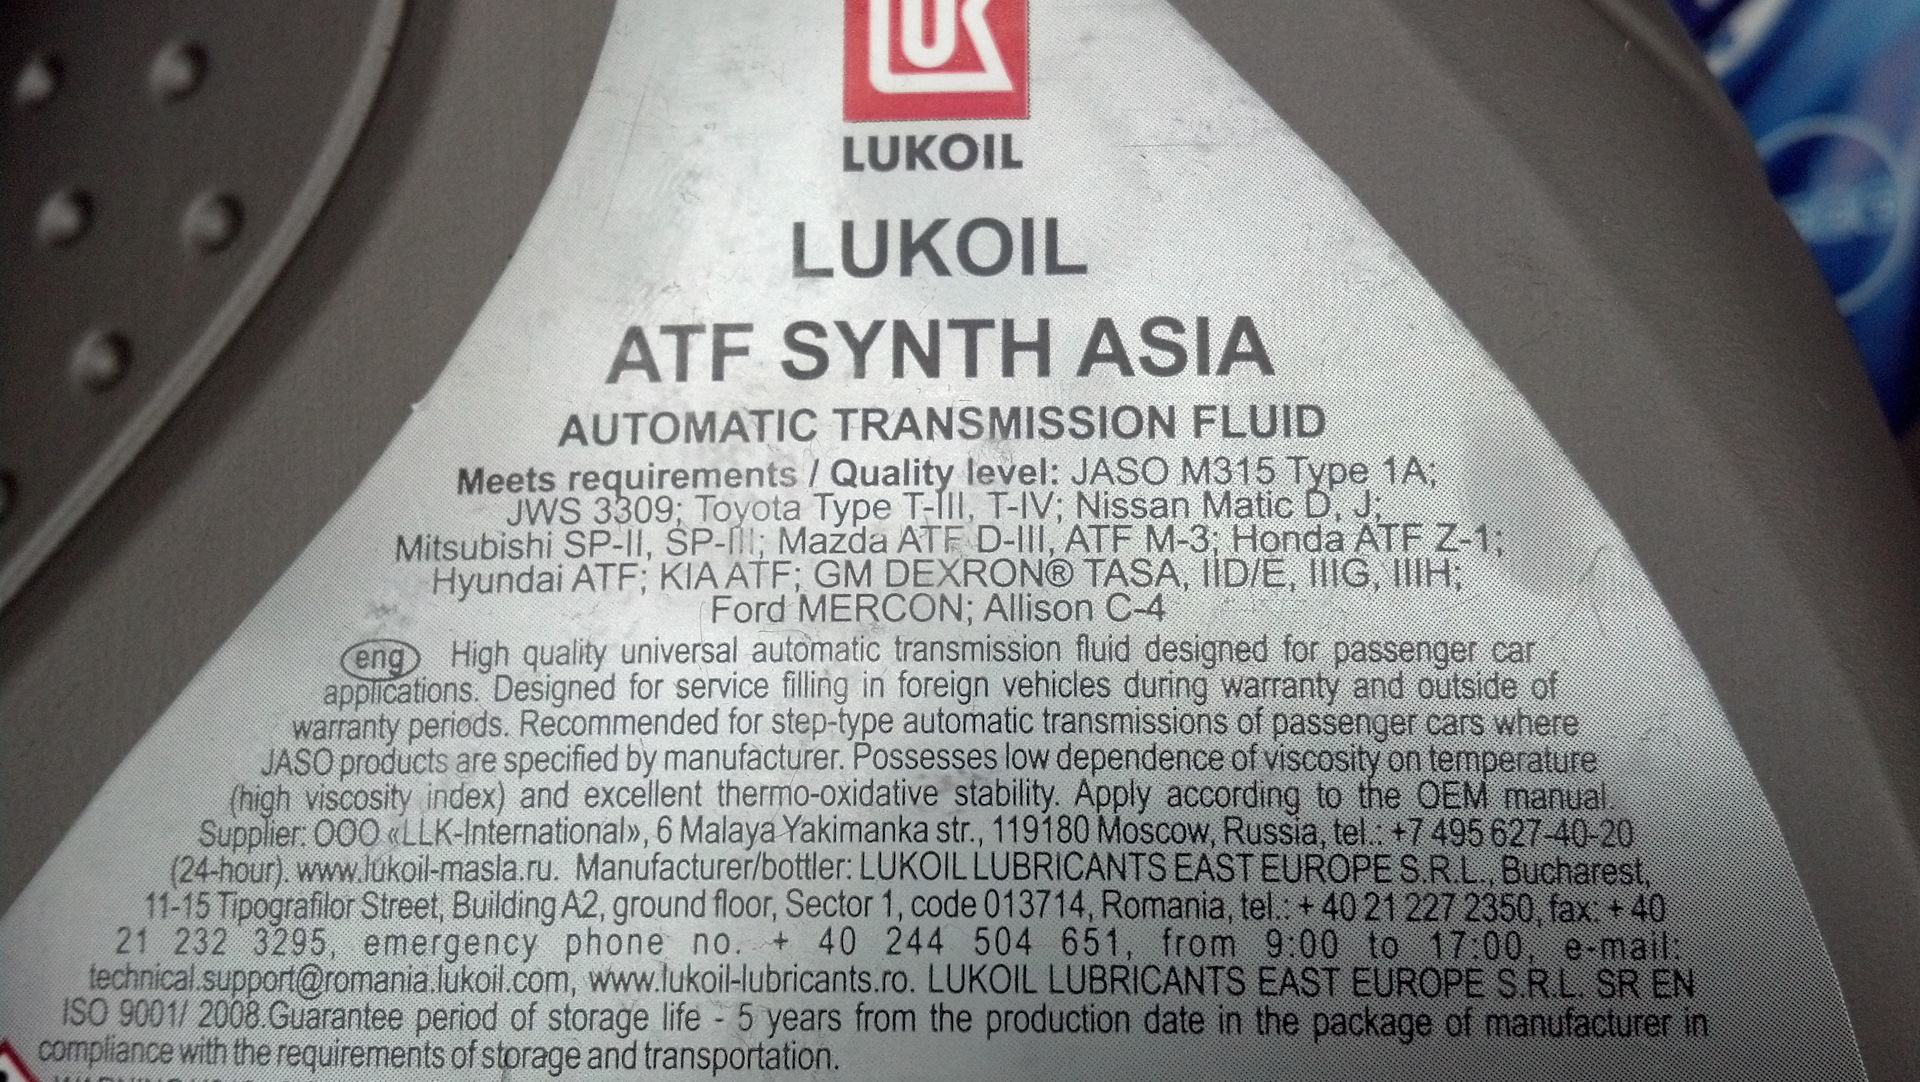 Лукойл asia. Lukoil ATF Synth 15. Lukoil ATF Synth m 15. Лукойл ATF Synth m 14. Лукойл ATF Synth Asia.